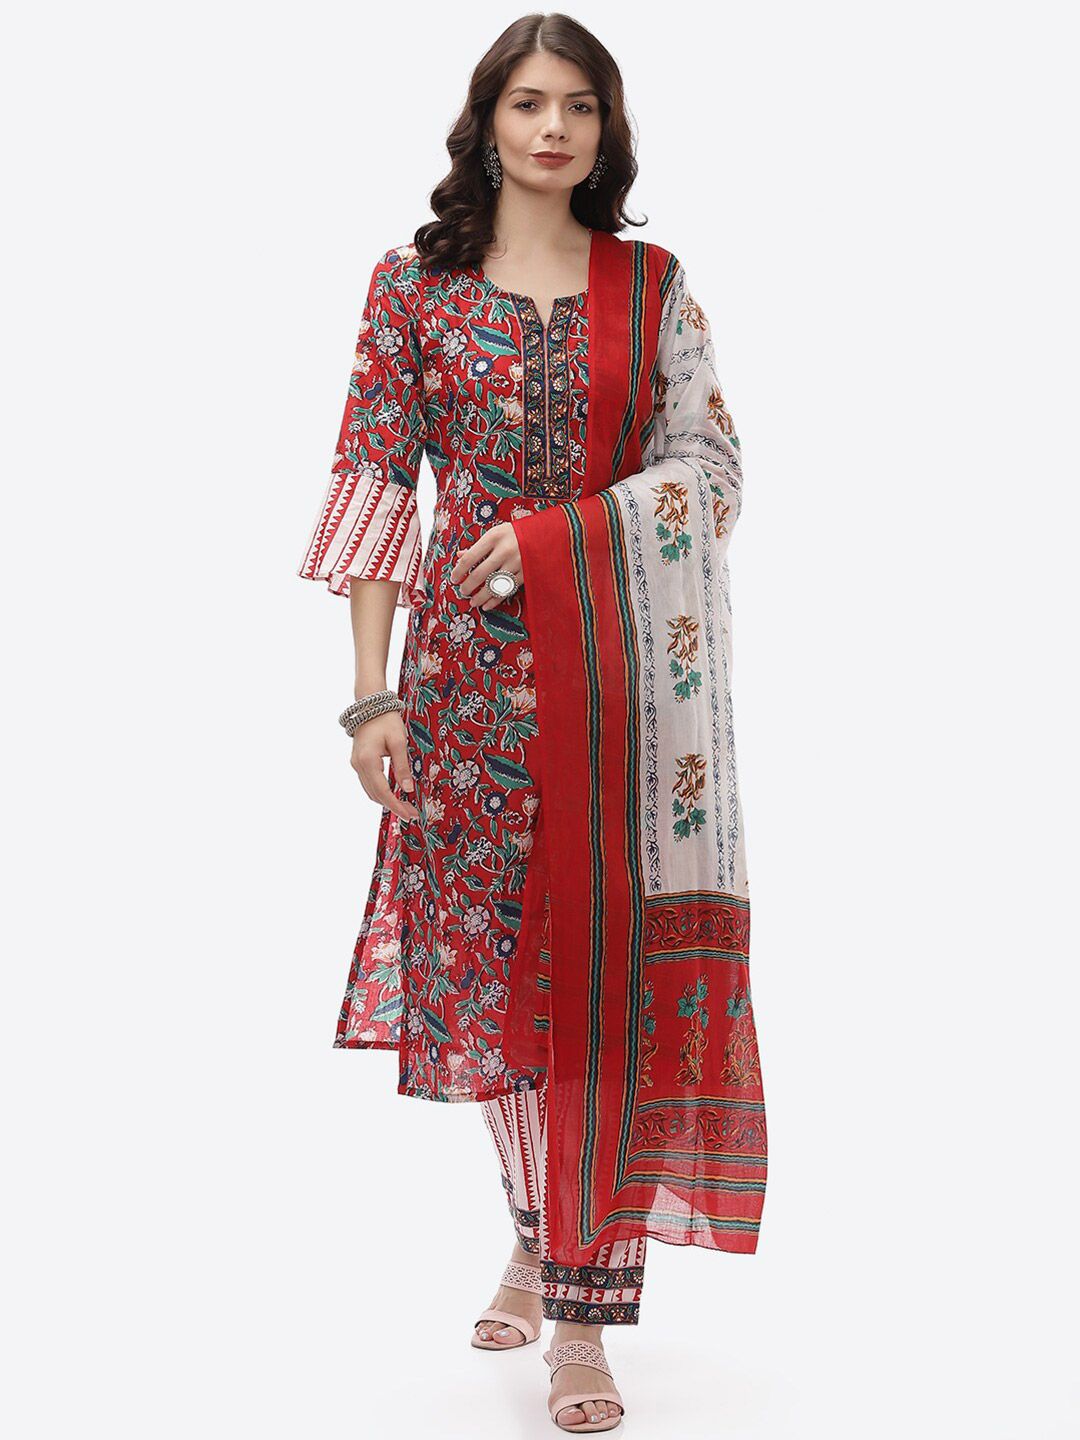 Biba Red & White Printed Unstitched Dress Material Price in India